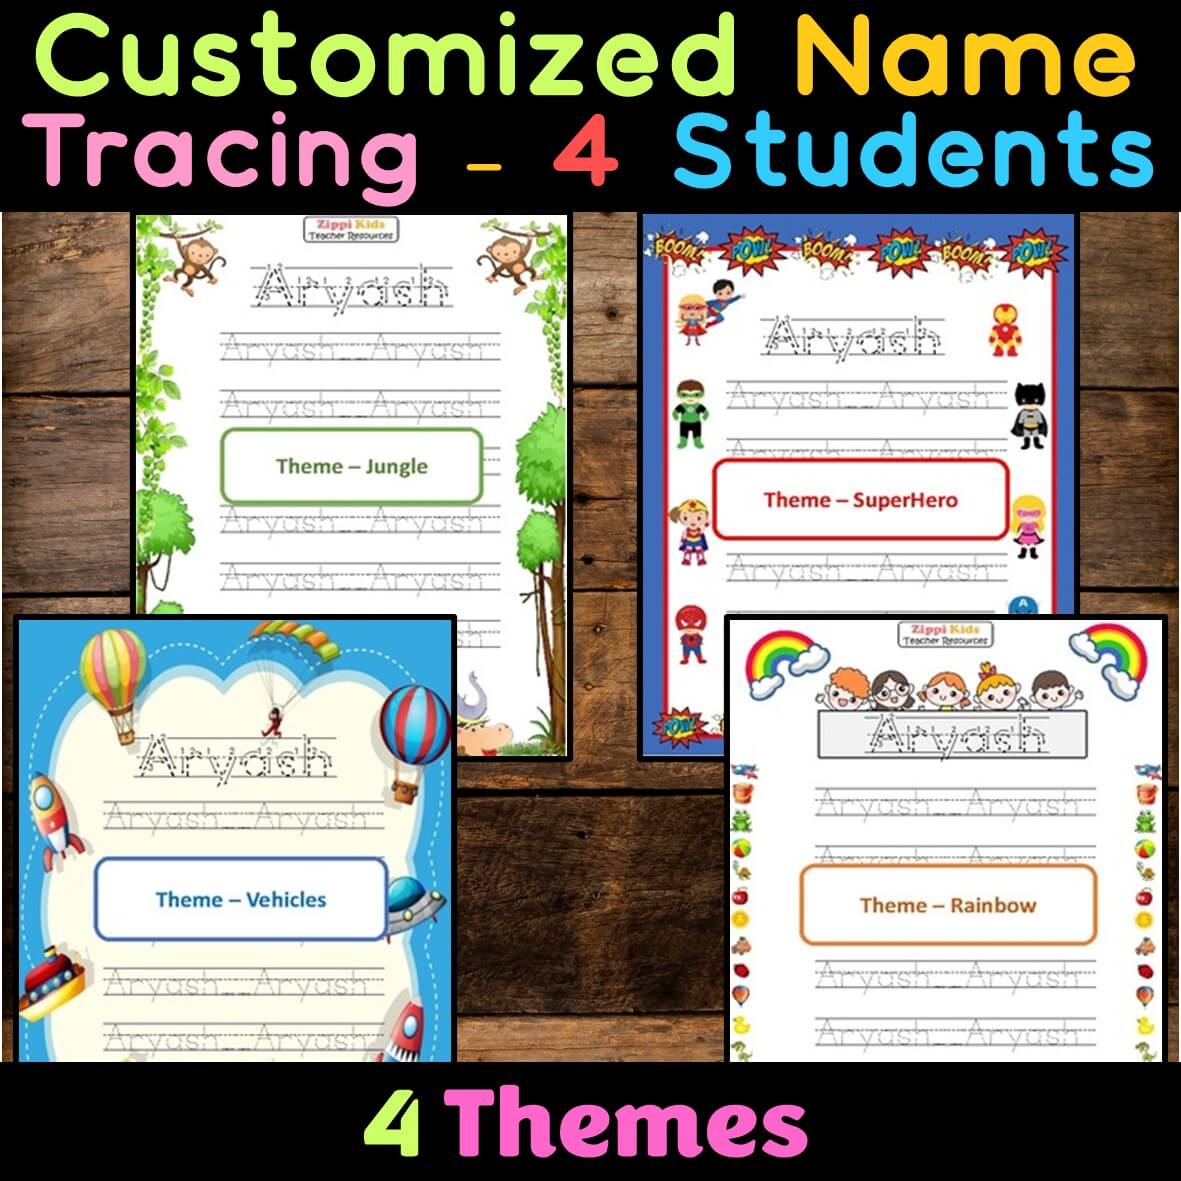 Customized Name Tracing Practice Worksheet - 4 students